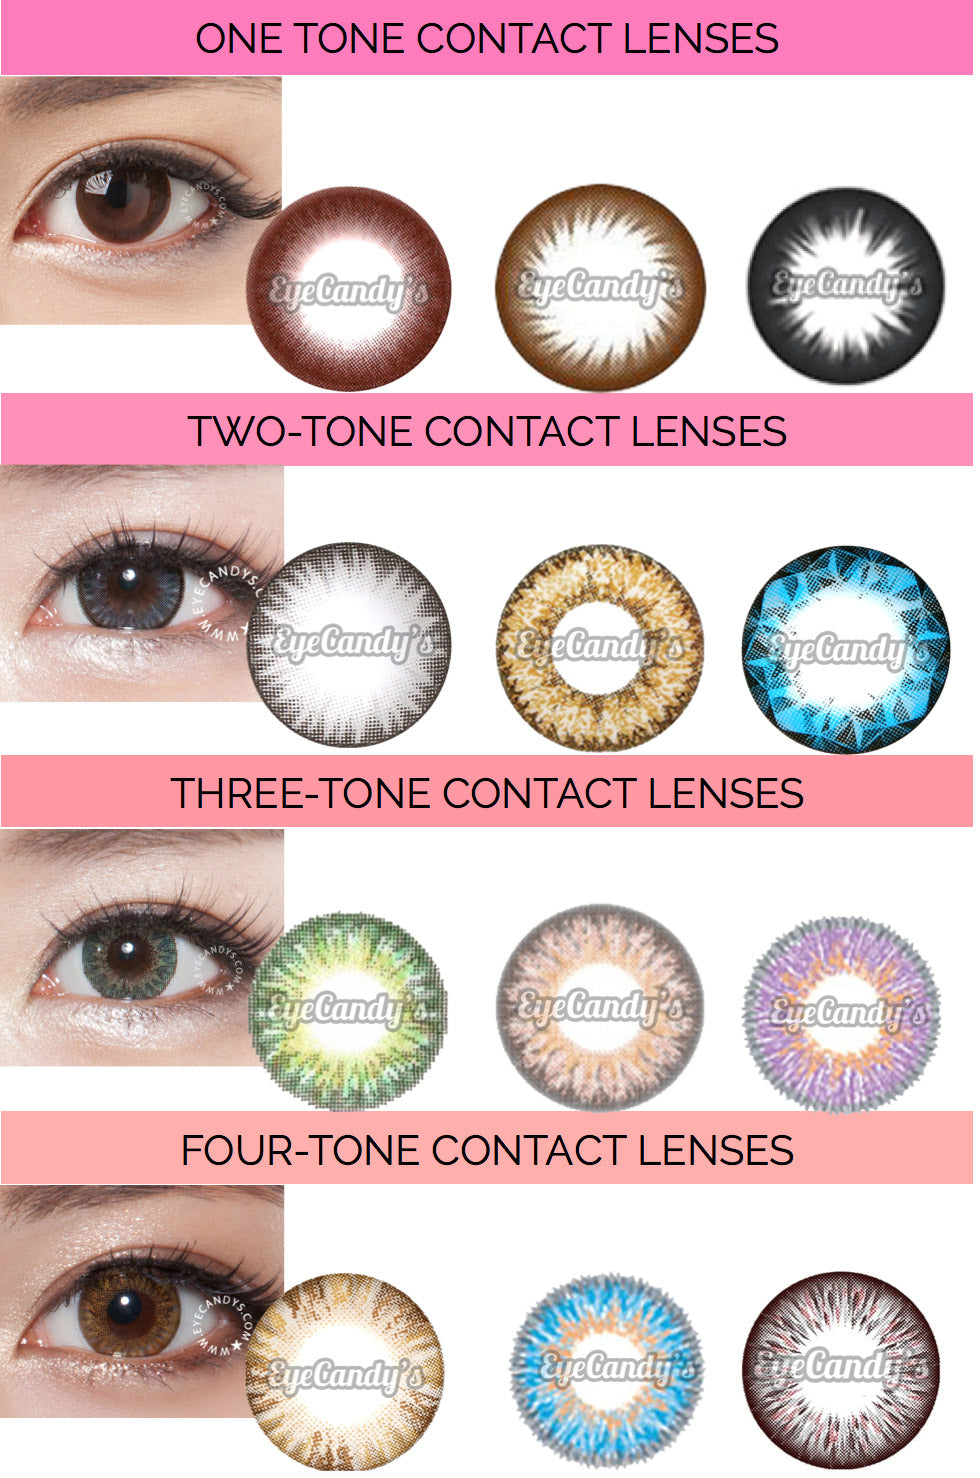 From Left to Right: 1-Tone Colored Contact Lenses (NEO Dali Premium Brown, GEO Annex Ring Brown, GEO Magic Black), 2-Tone Colored Contact Lenses (GEO Bella Grey, GEO Nudy Quarter Brown, NEO Ruby Queen Blue), 3-Tone Colored Contacts (GEO Tri Color World Green, GEO Eyescream Chocomousse, NEO Glamour Violet), 4-Tone Colored Contacts (Royal Vision Creamy Brown, NEO Queen Blue, Royal Vision Summer Doll Grey)